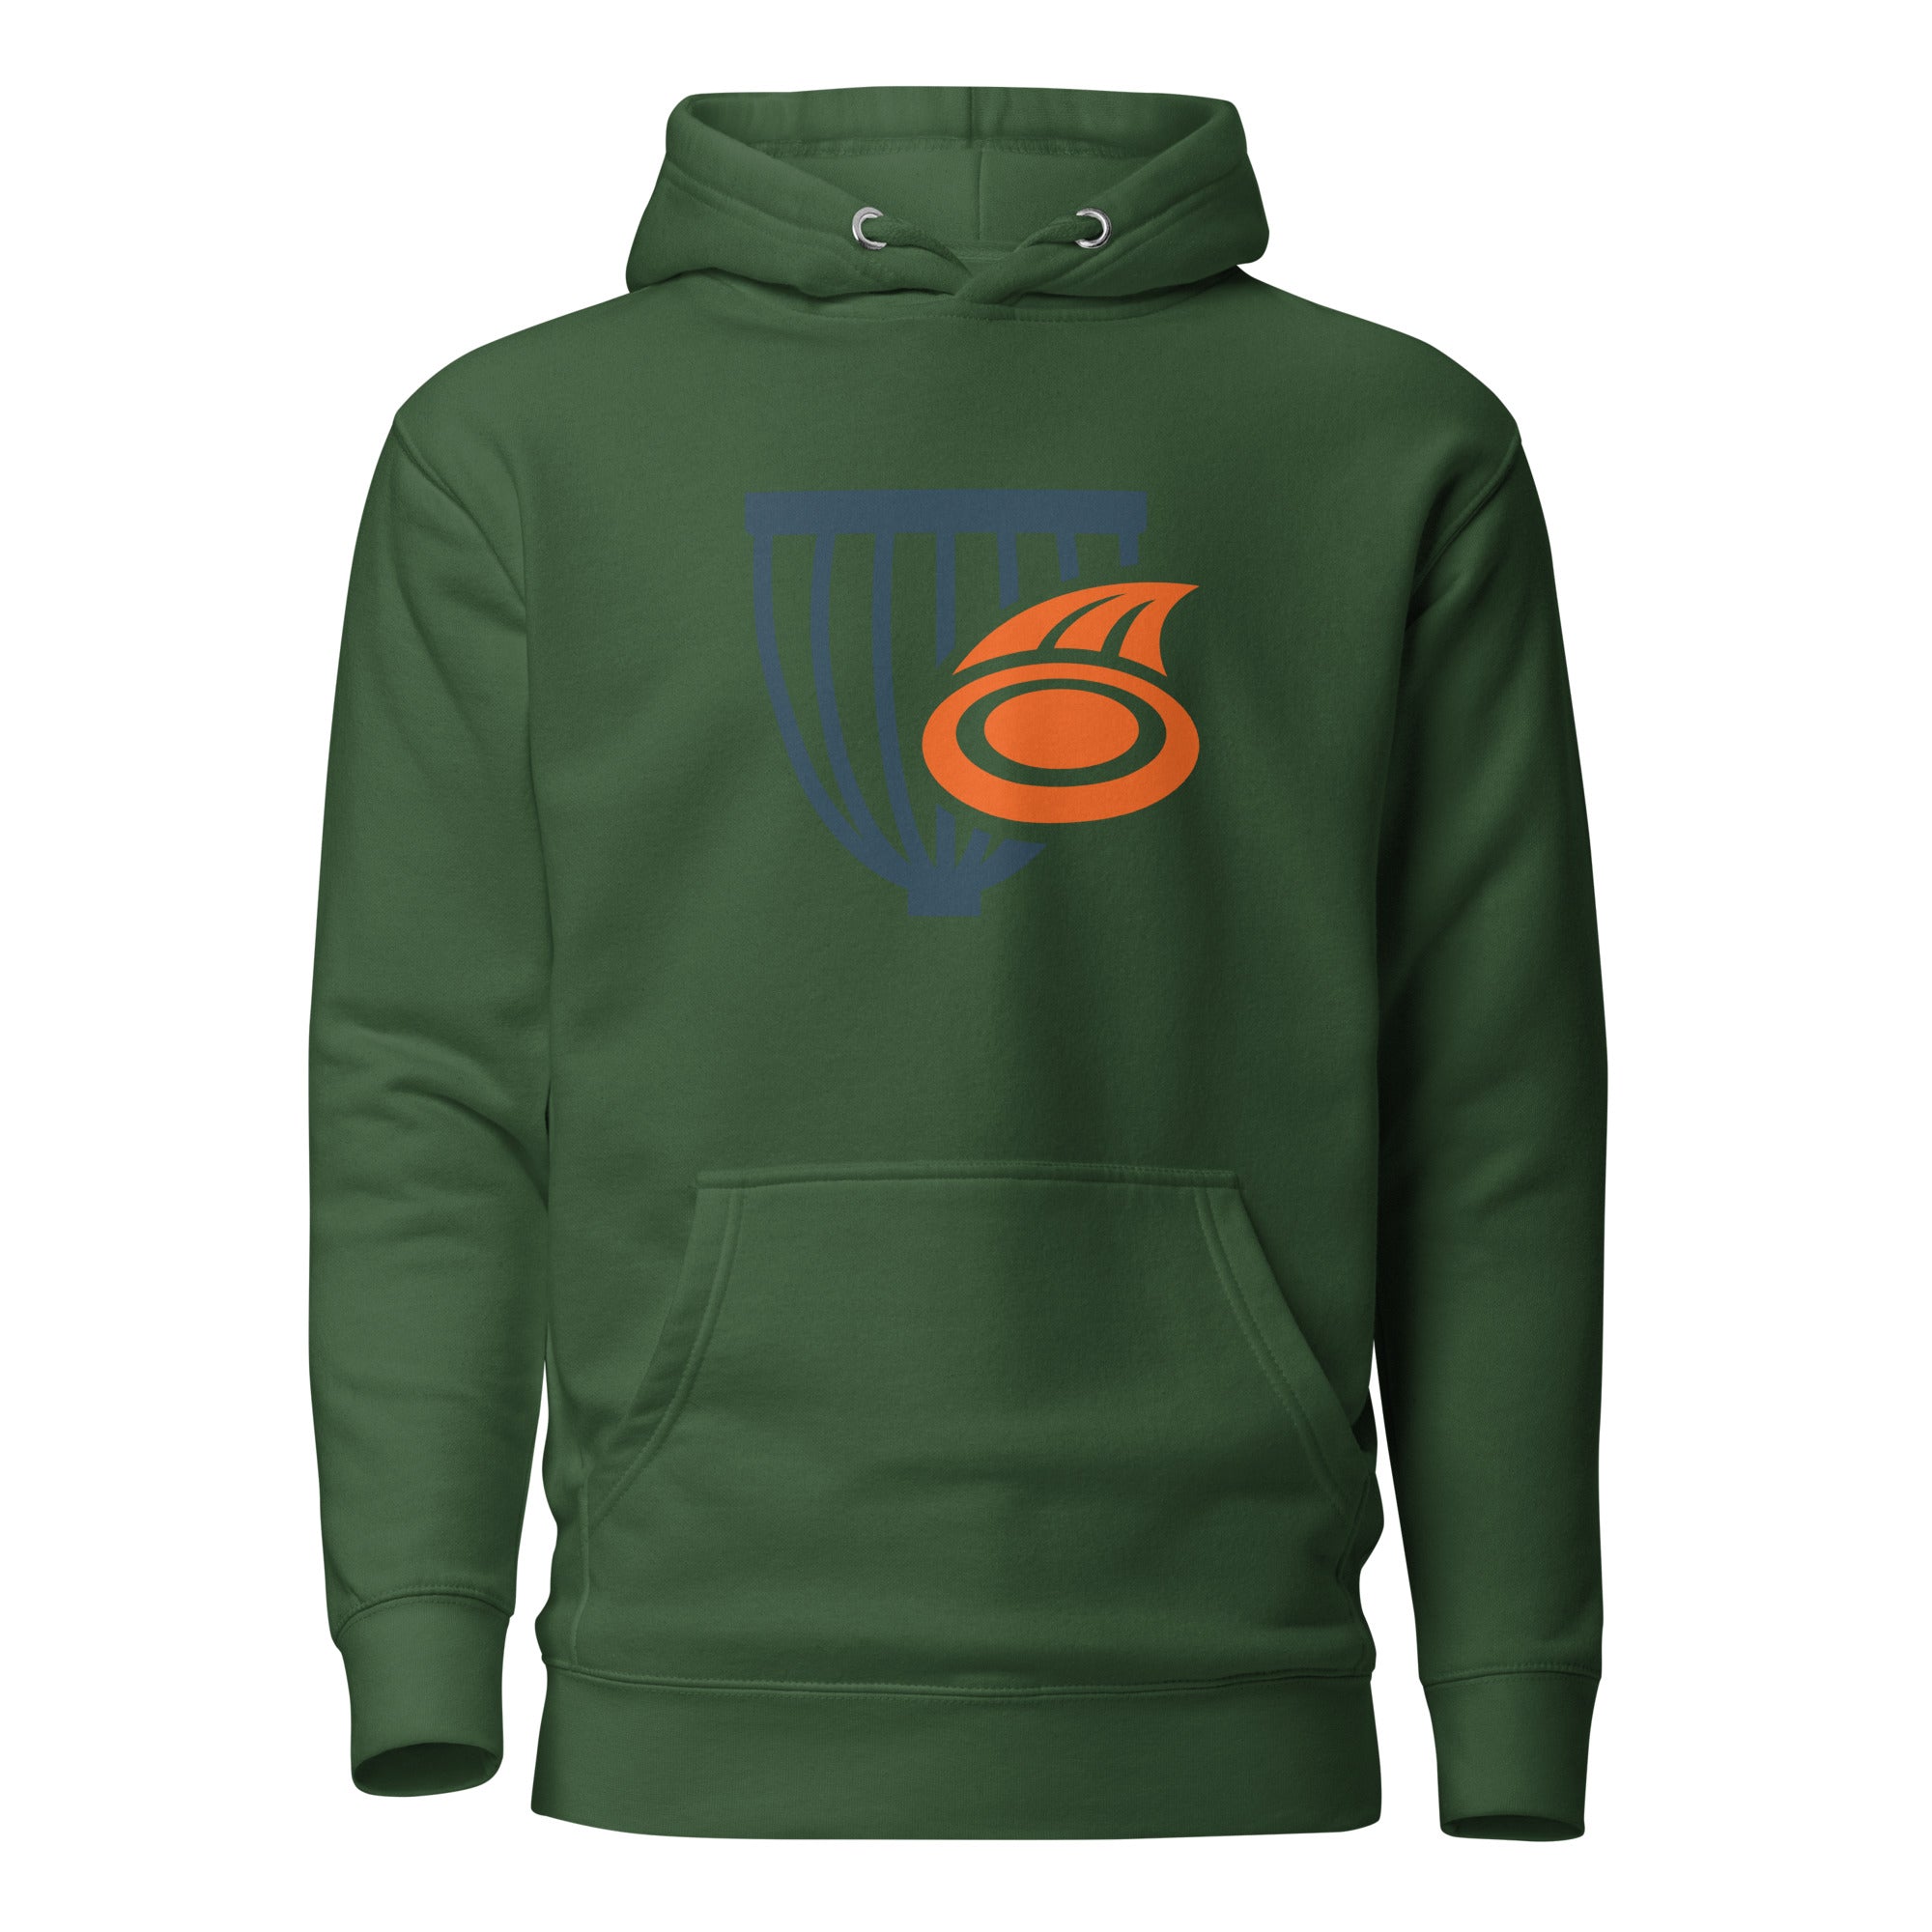 Buy forest-green The Disc Depot Unisex Hoodie